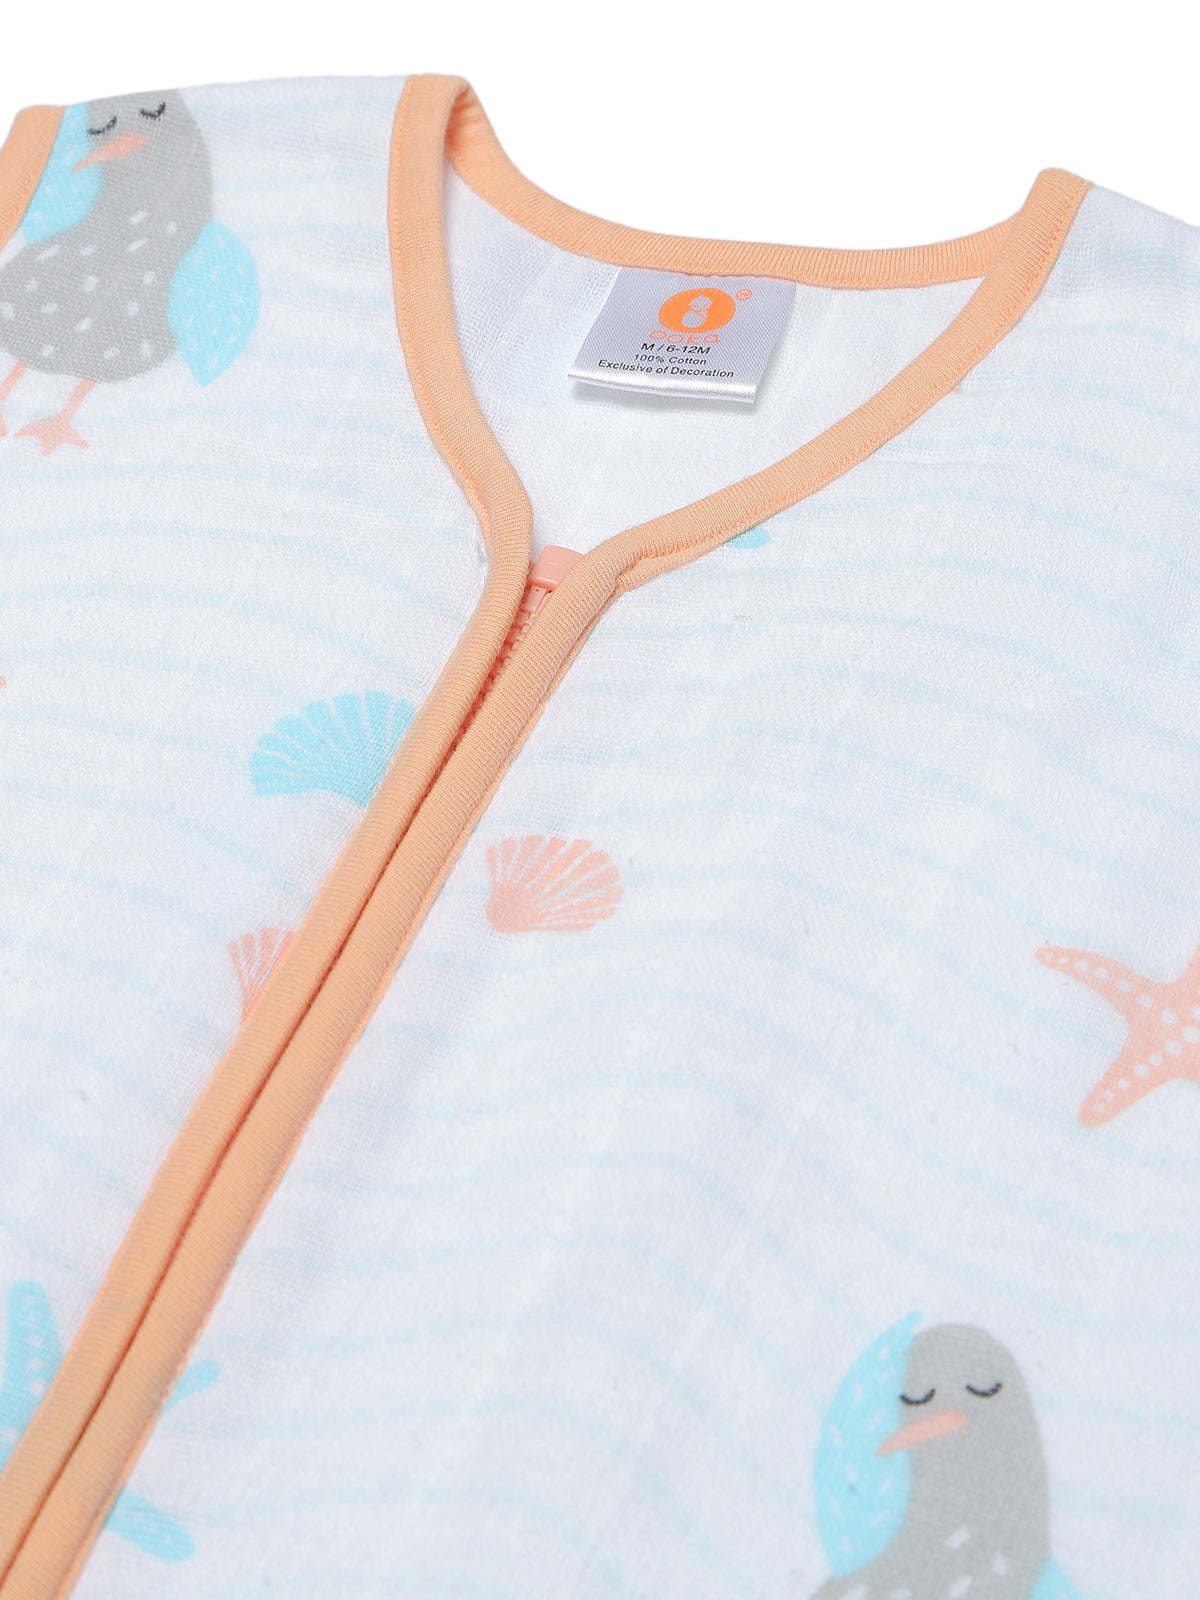 Newborn Care Gift Set from Ooka Baby (An Ocean's Lullaby Collection)- Available in 3 Prints